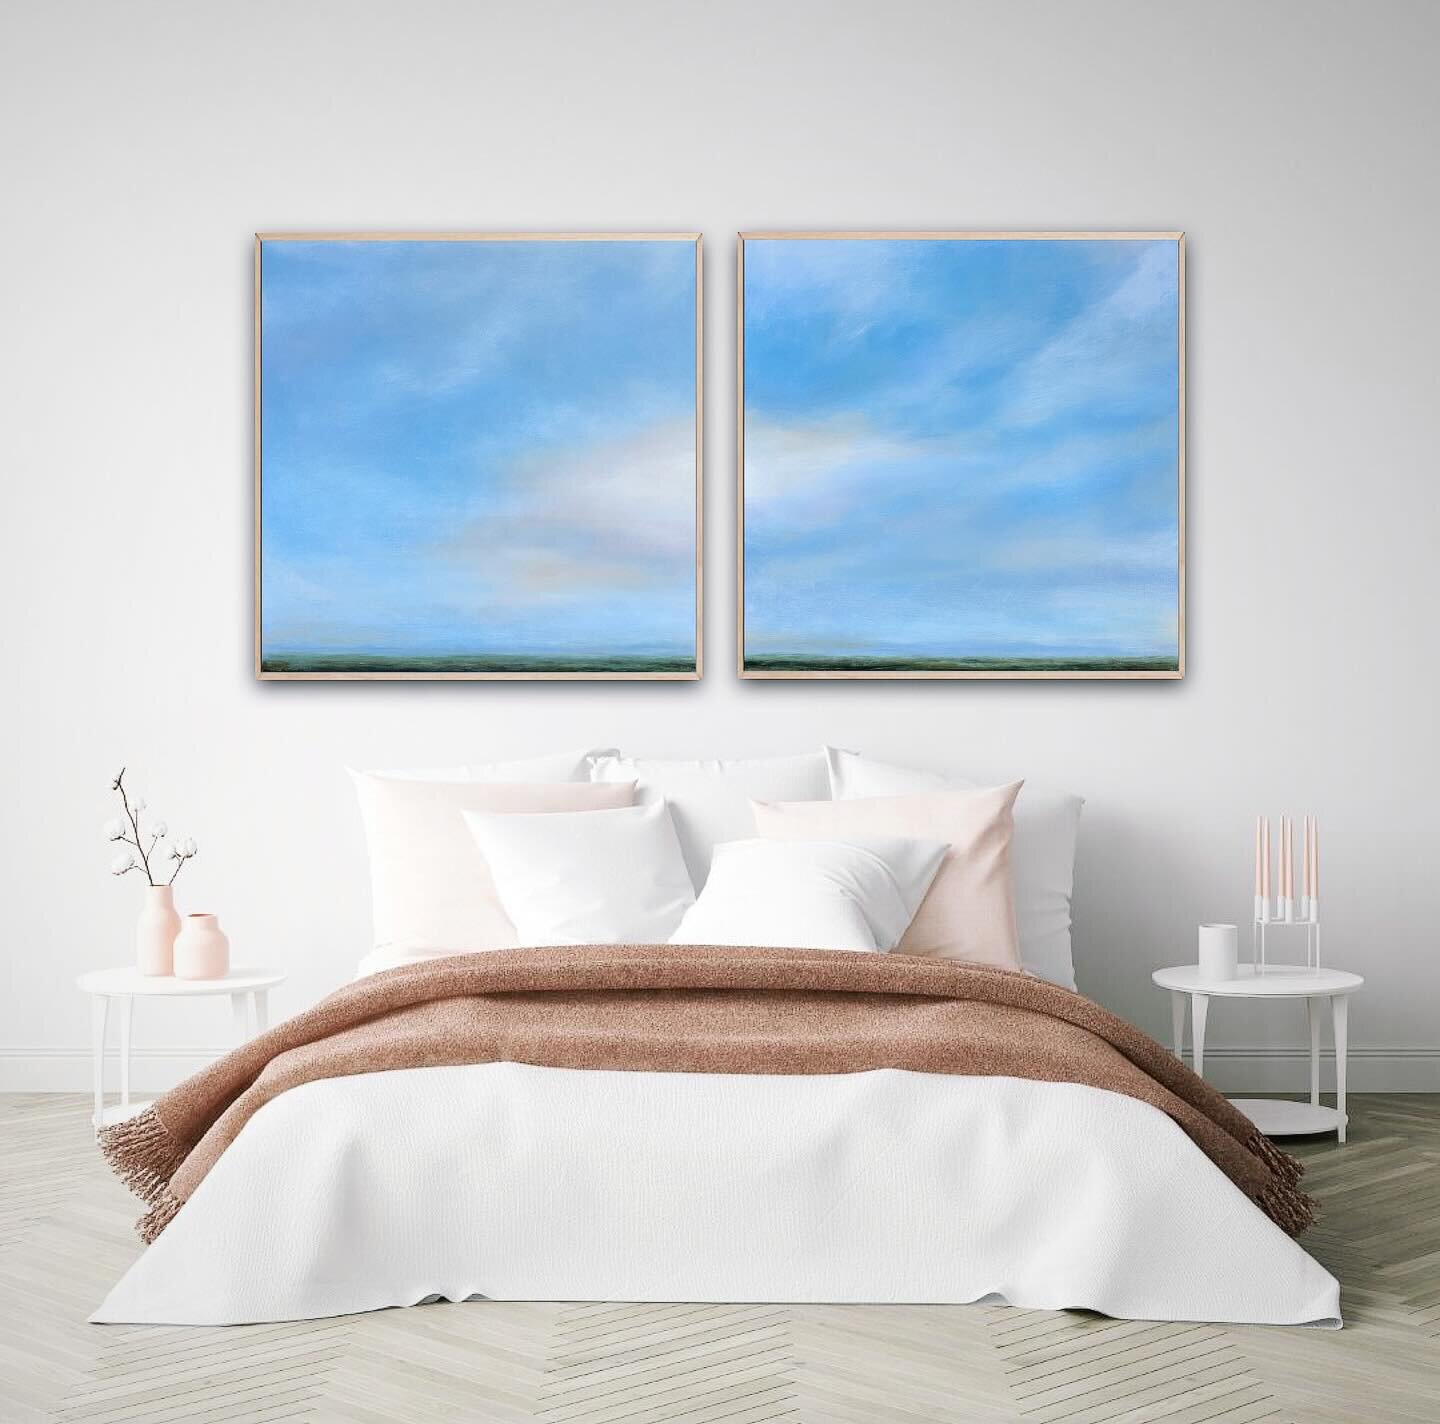 Doesn&rsquo;t this bedroom look dreamy?! These 2 paintings pair great together. Feel it Still #1 and #2, 36x36 

#dreamy #skyscape #homedecoration #interiorstyle #artforthehome #interiorinspiration #interiorstyling #dawnrentz #cloudscape #horizons #c